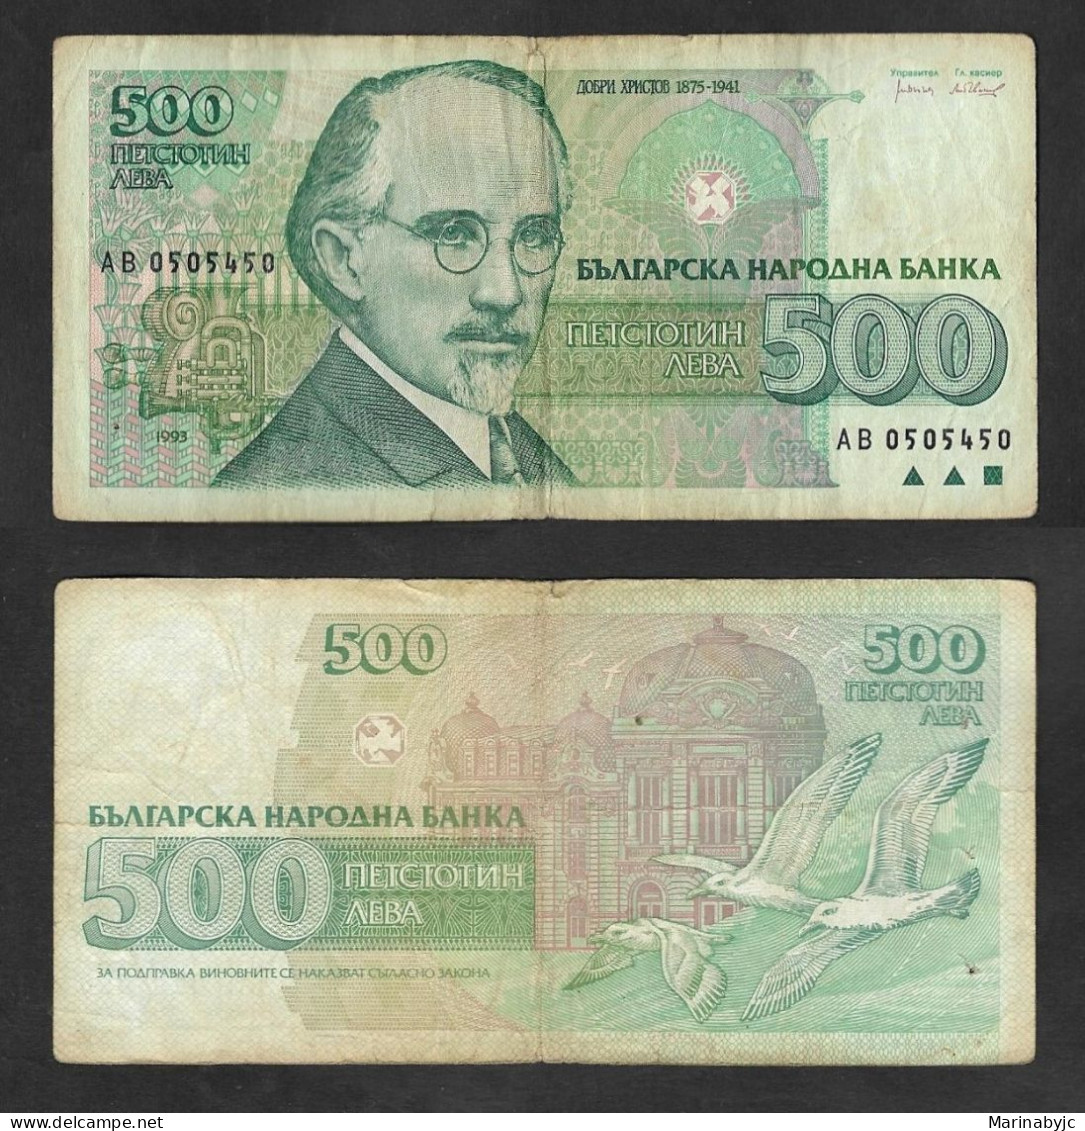 SE)1993 BULGARIA, 500 LEVA BANKNOTE OF THE CENTRAL BANK OF BULGARIA, WITH REVERSE, VF - Gebraucht